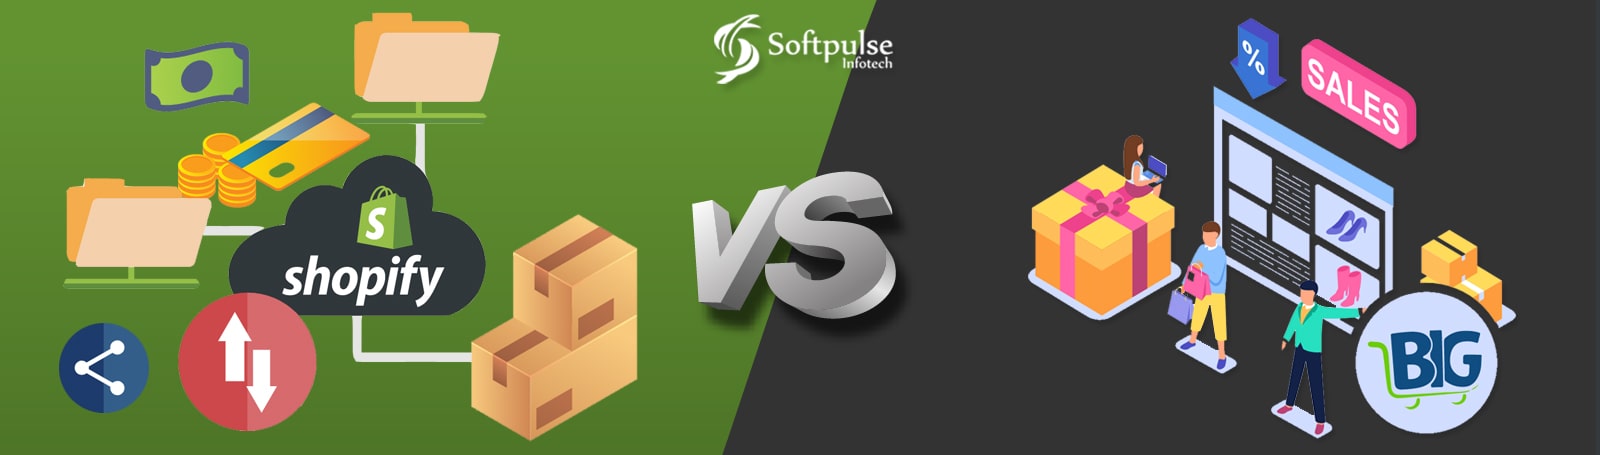 Shopify vs. BigCommerce: Which enterprise solution is right for you?